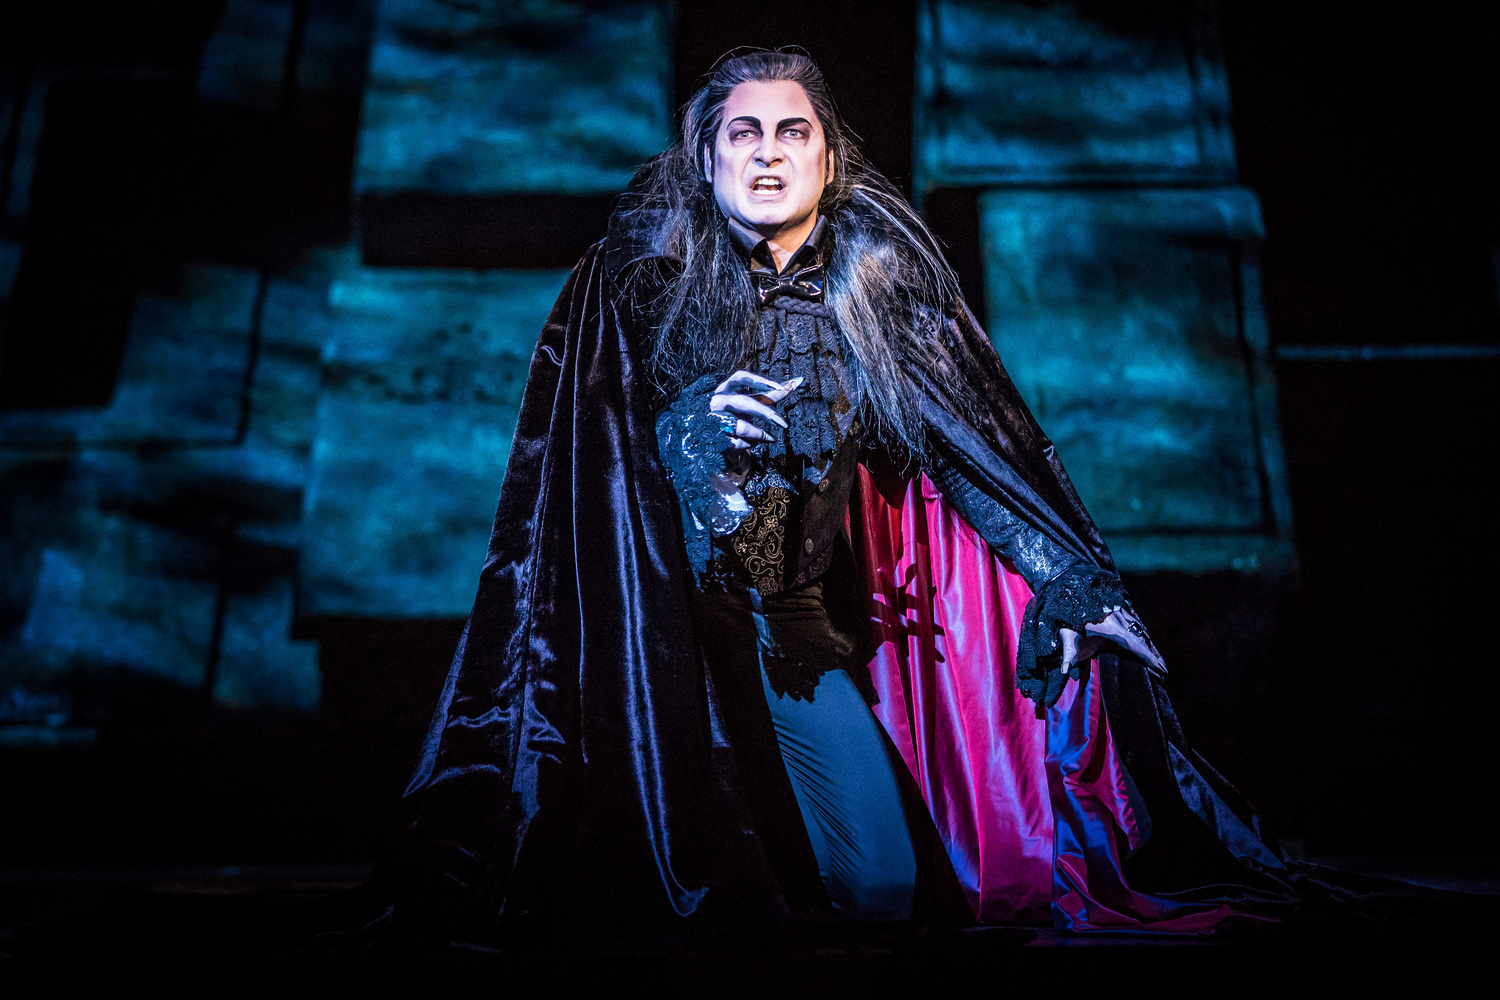 Review: DANCE OF THE VAMPIRES at Musical Dome, Cologne - The Vampires take a big, juicy bite out of Cologne 